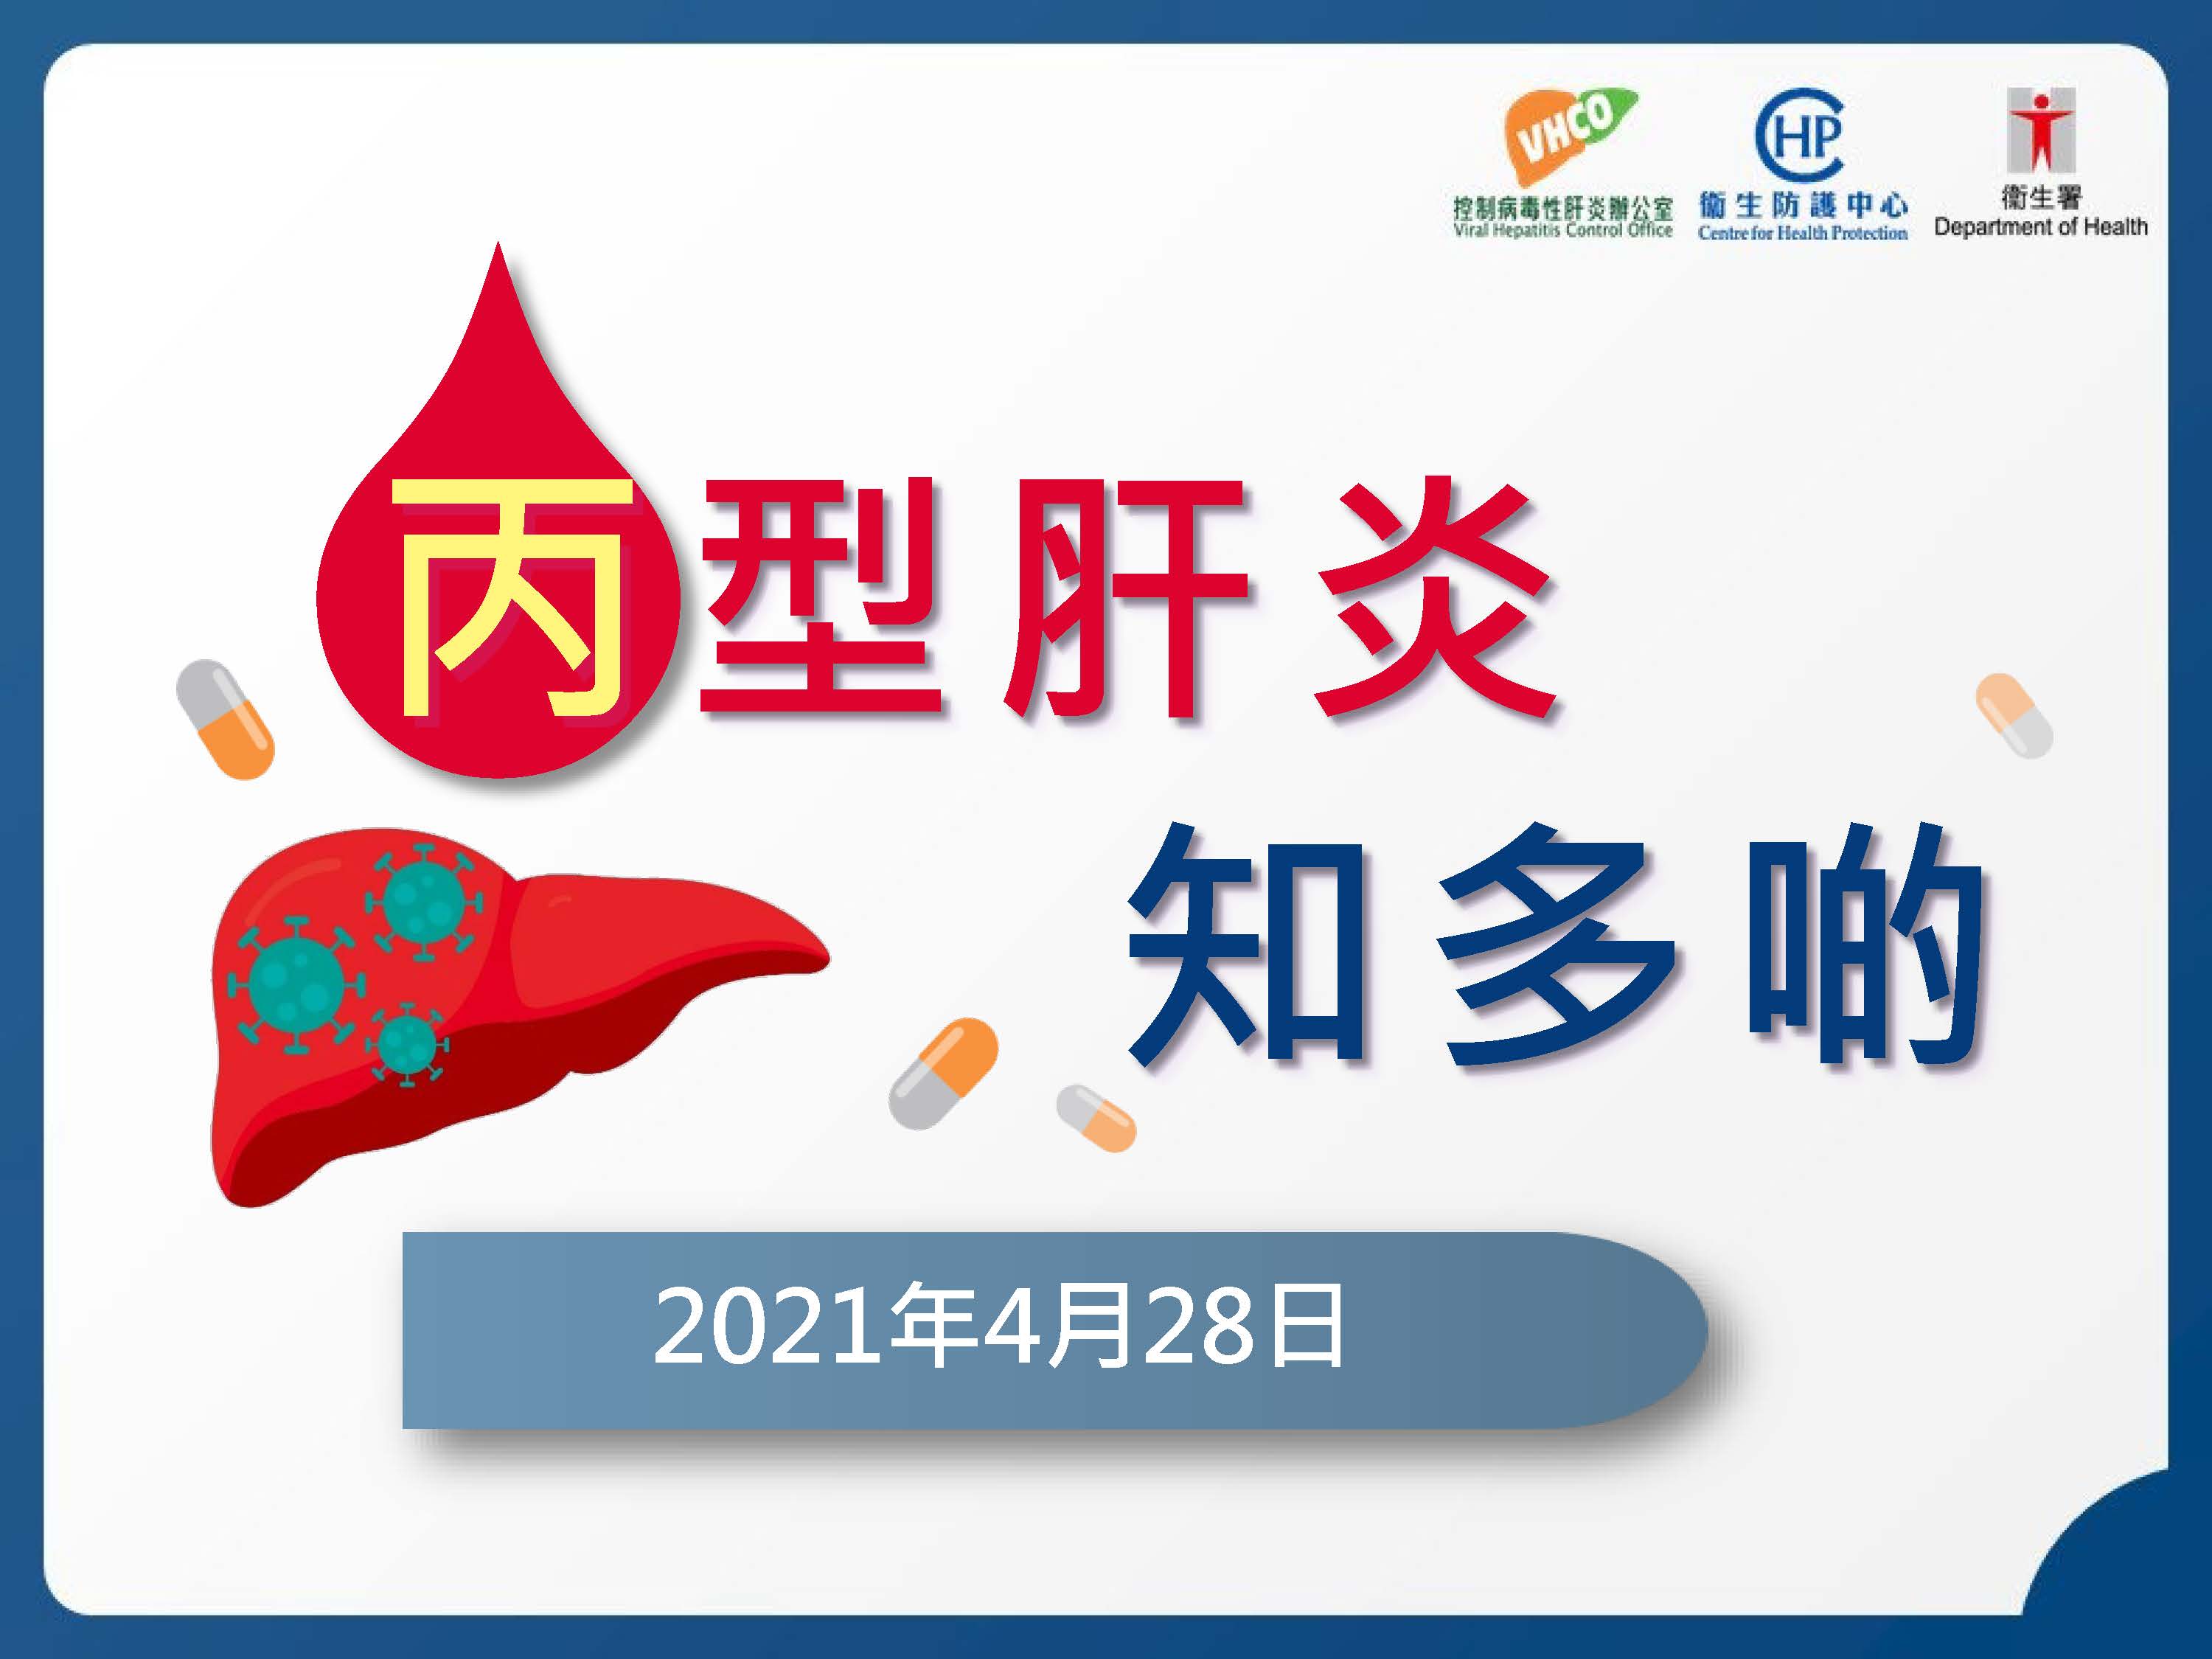 Hepatitis C Virus Infection (only Chinese version available)